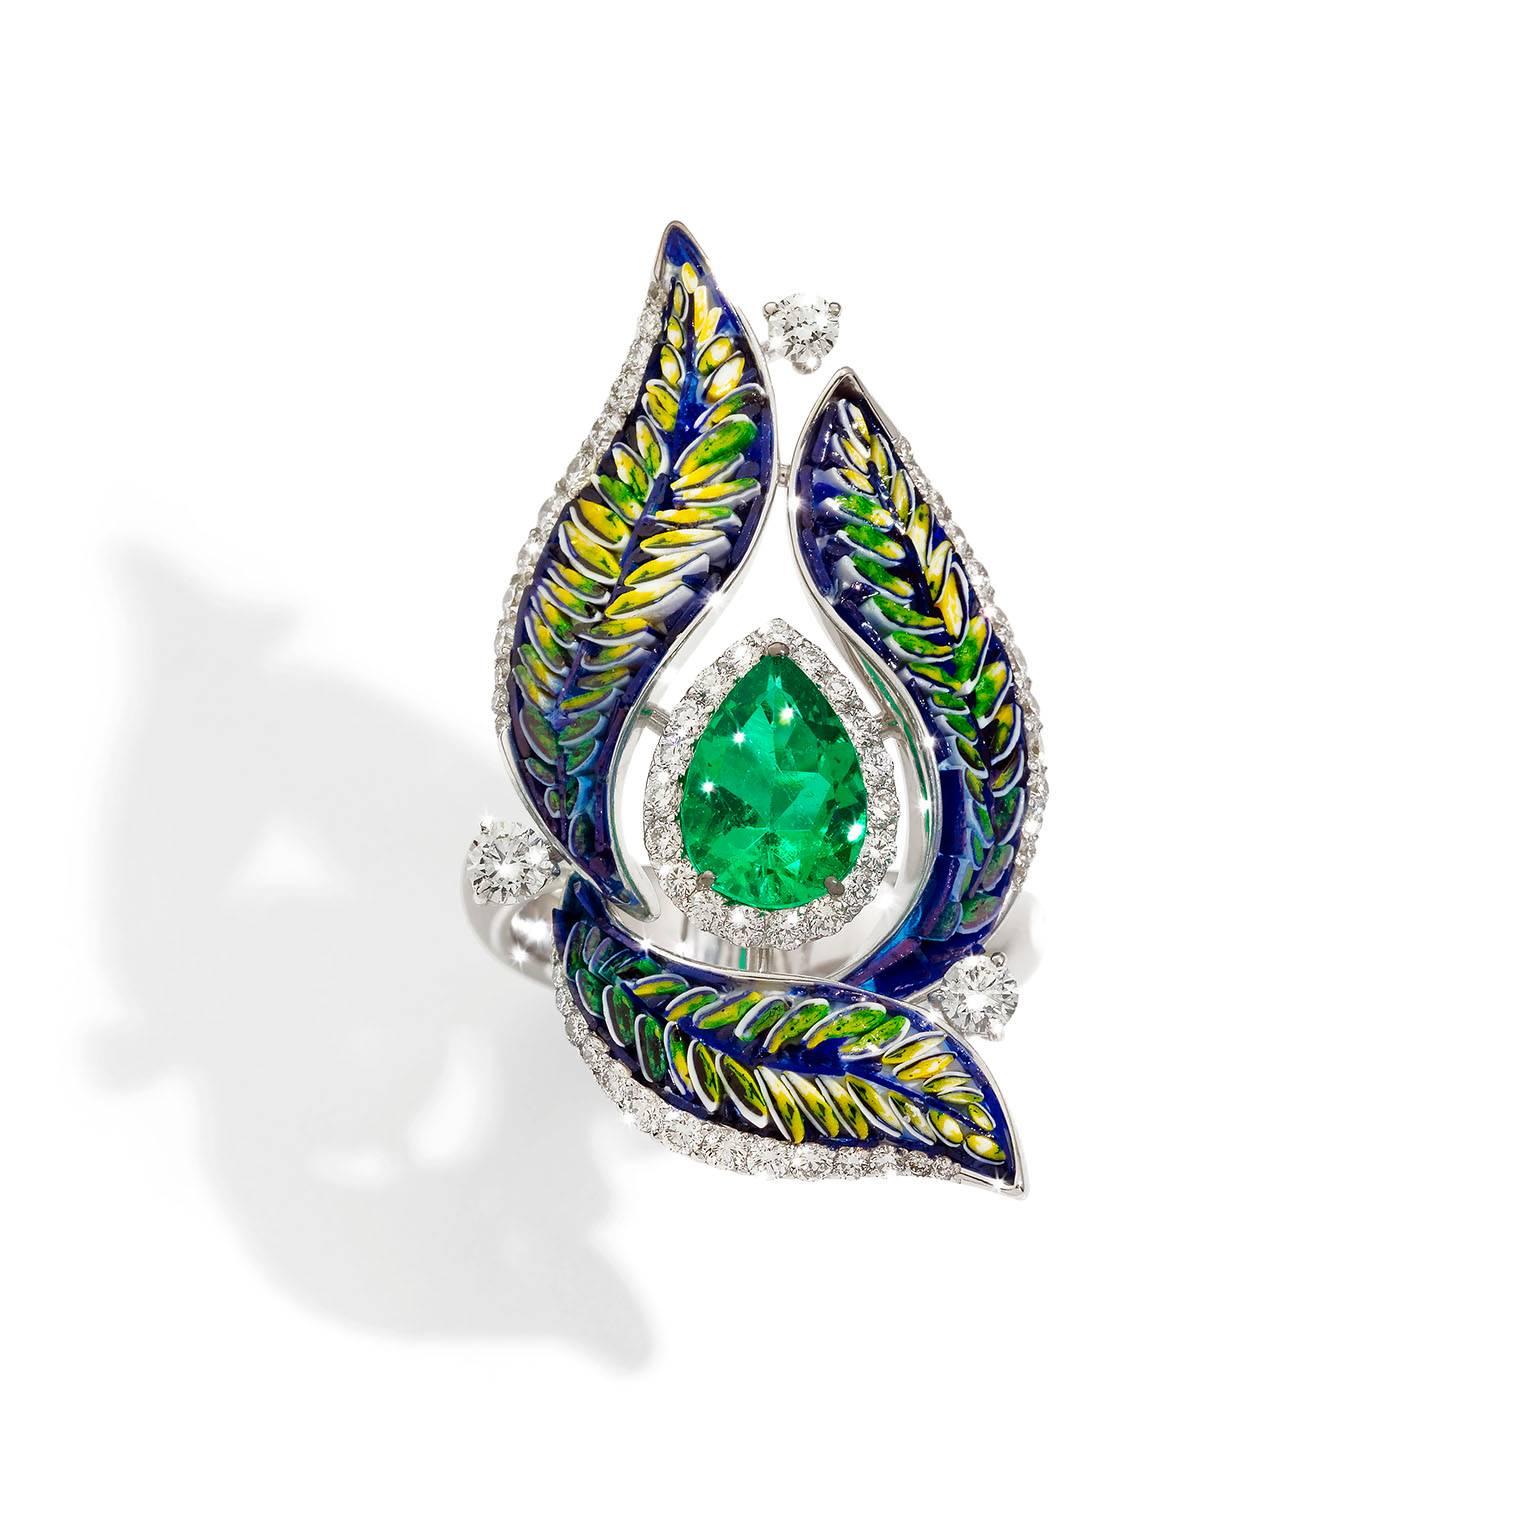 Fern.

Hundreds of Micro Mosaic tesserae, set by hands of unrivaled talent, form soft and flowing leaves that are accompanied by extraordinary emeralds that enhance their royal beauty, along with diamonds placed as dewy drops.

The Micro Mosaic of